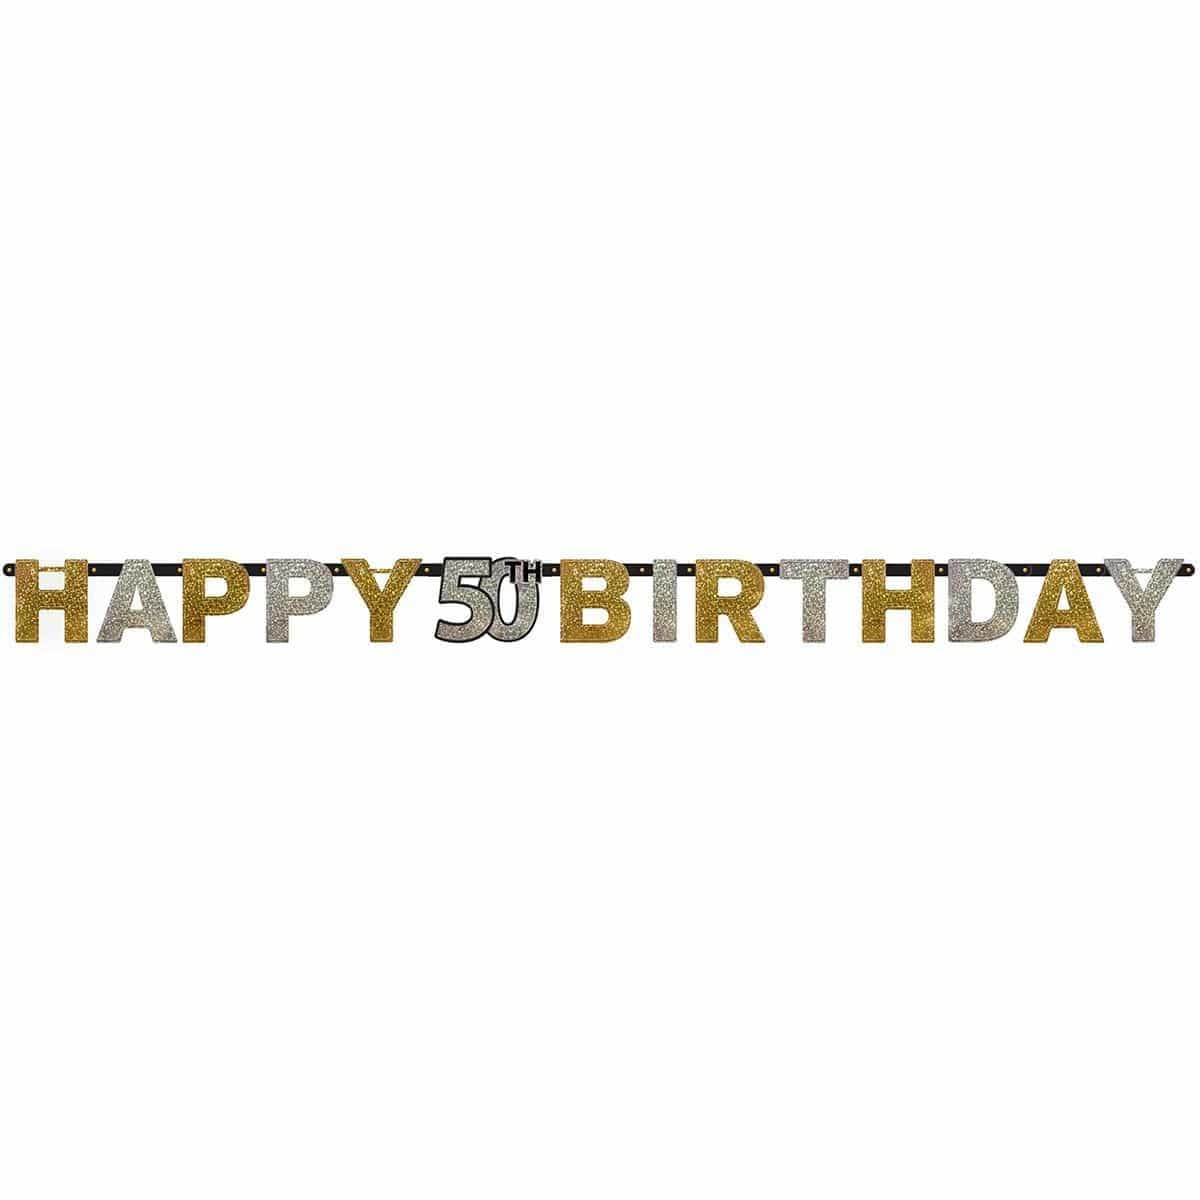 Buy Age Specific Birthday 50th Sparkling Celeb - Letter Banner 7ft sold at Party Expert